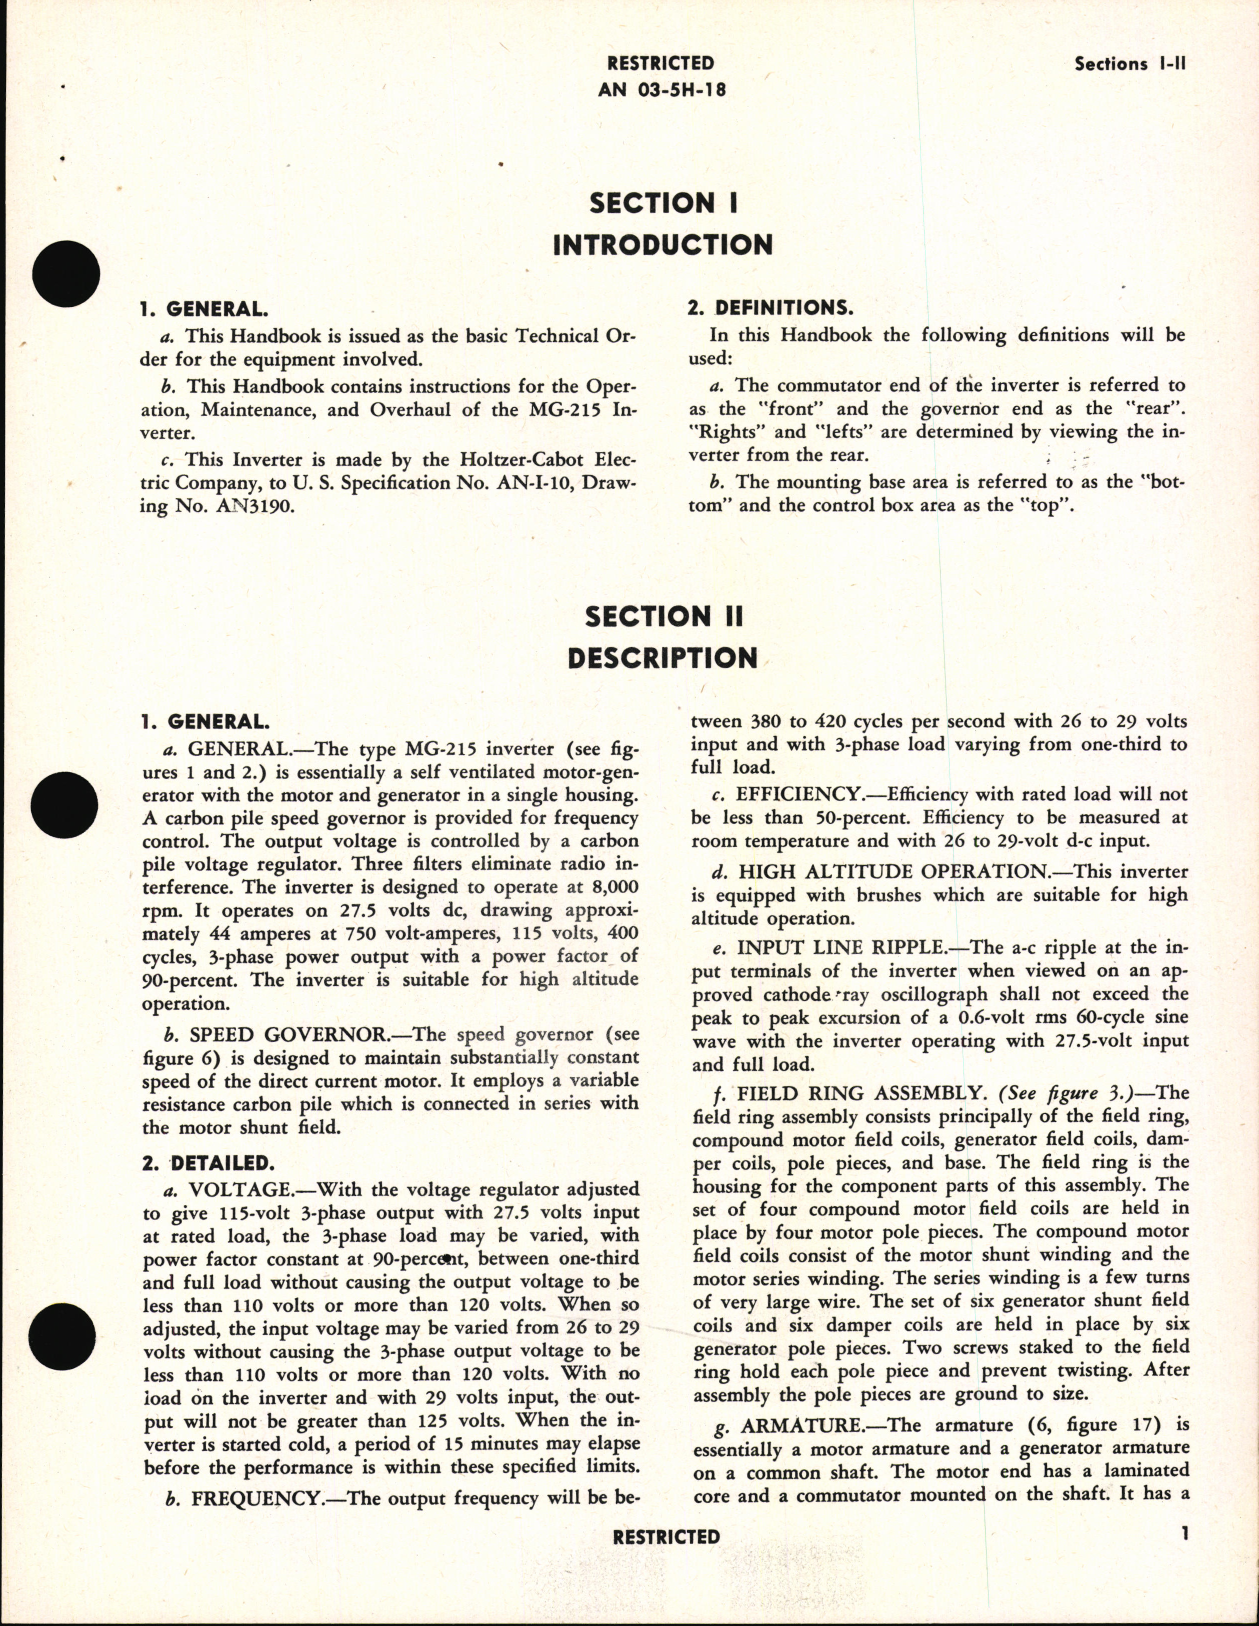 Sample page 5 from AirCorps Library document: Operation, Service & Overhaul Instructions with Parts Catalog for Inverter Type MG-215